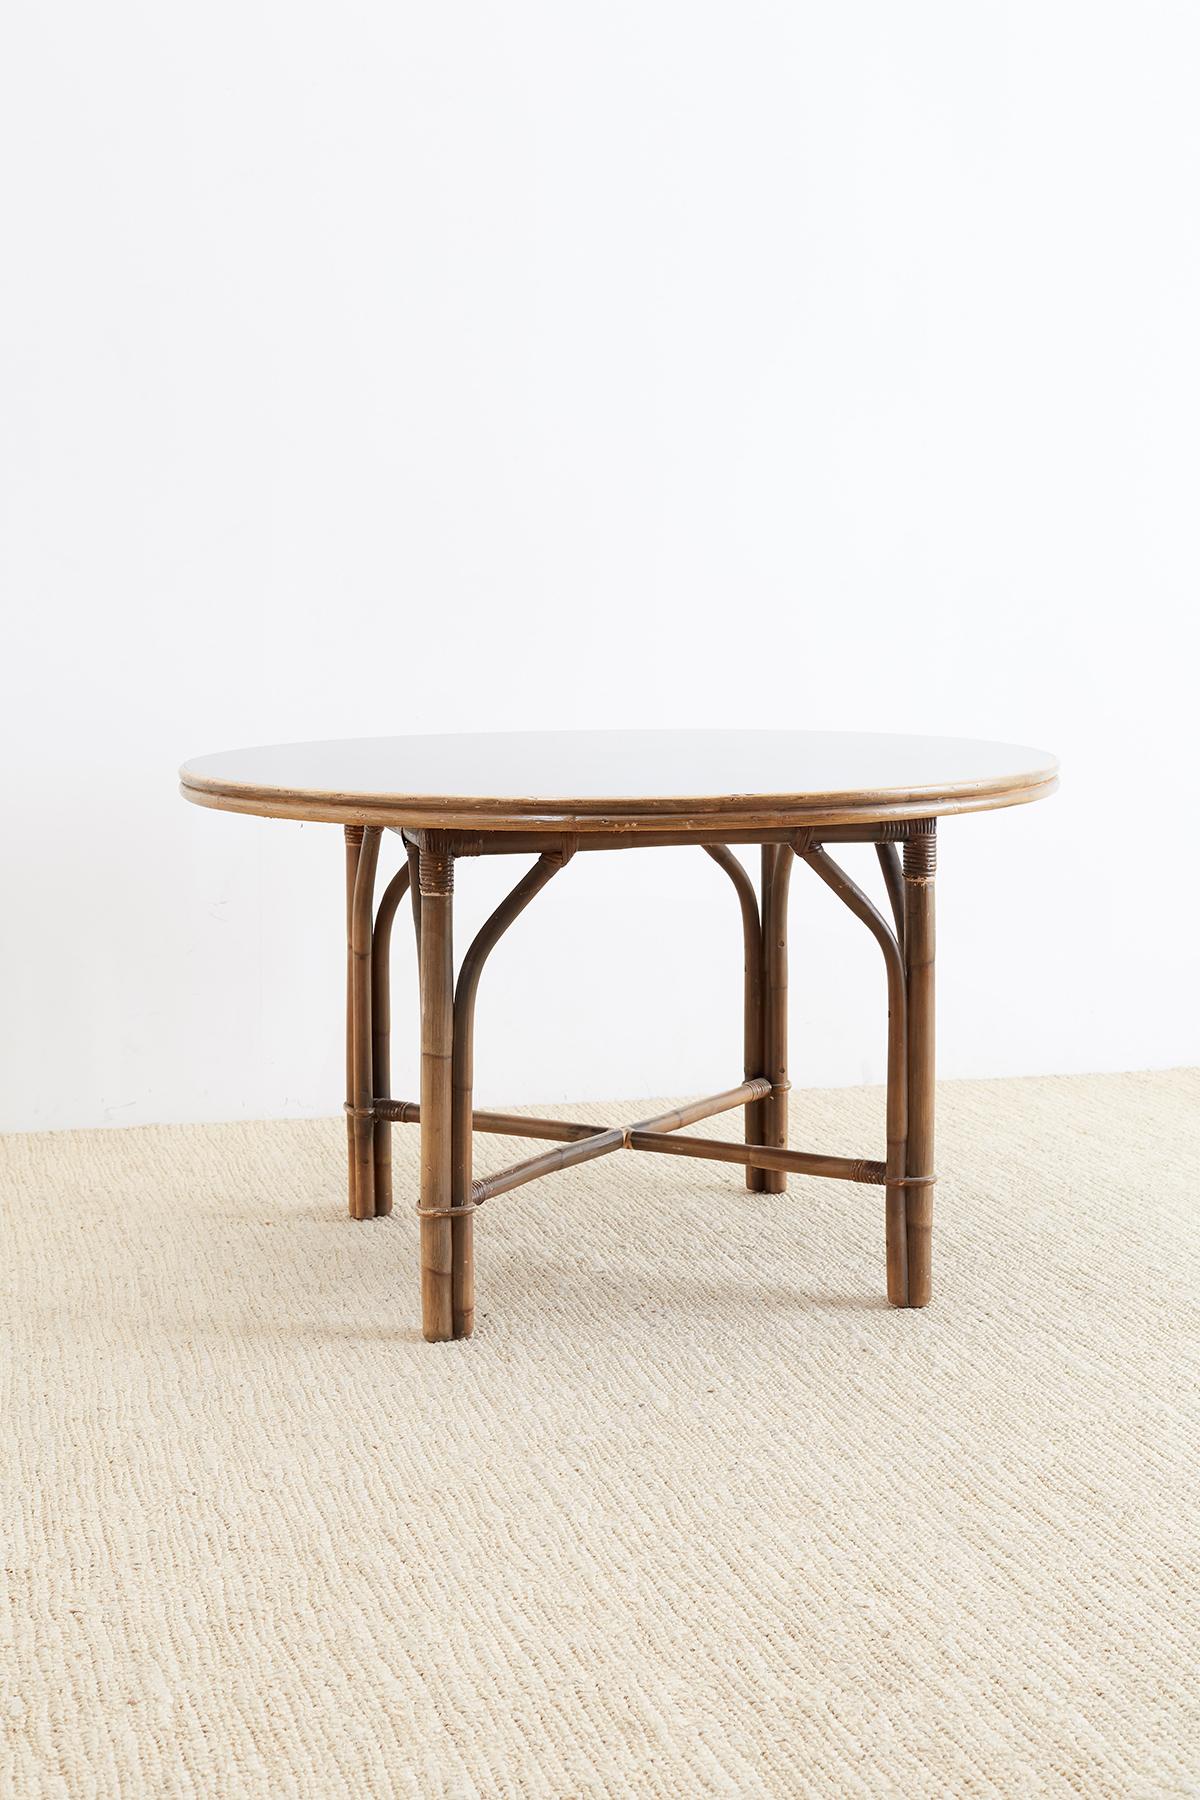 Hand-Crafted Ficks Reed Midcentury Rattan Dining Table